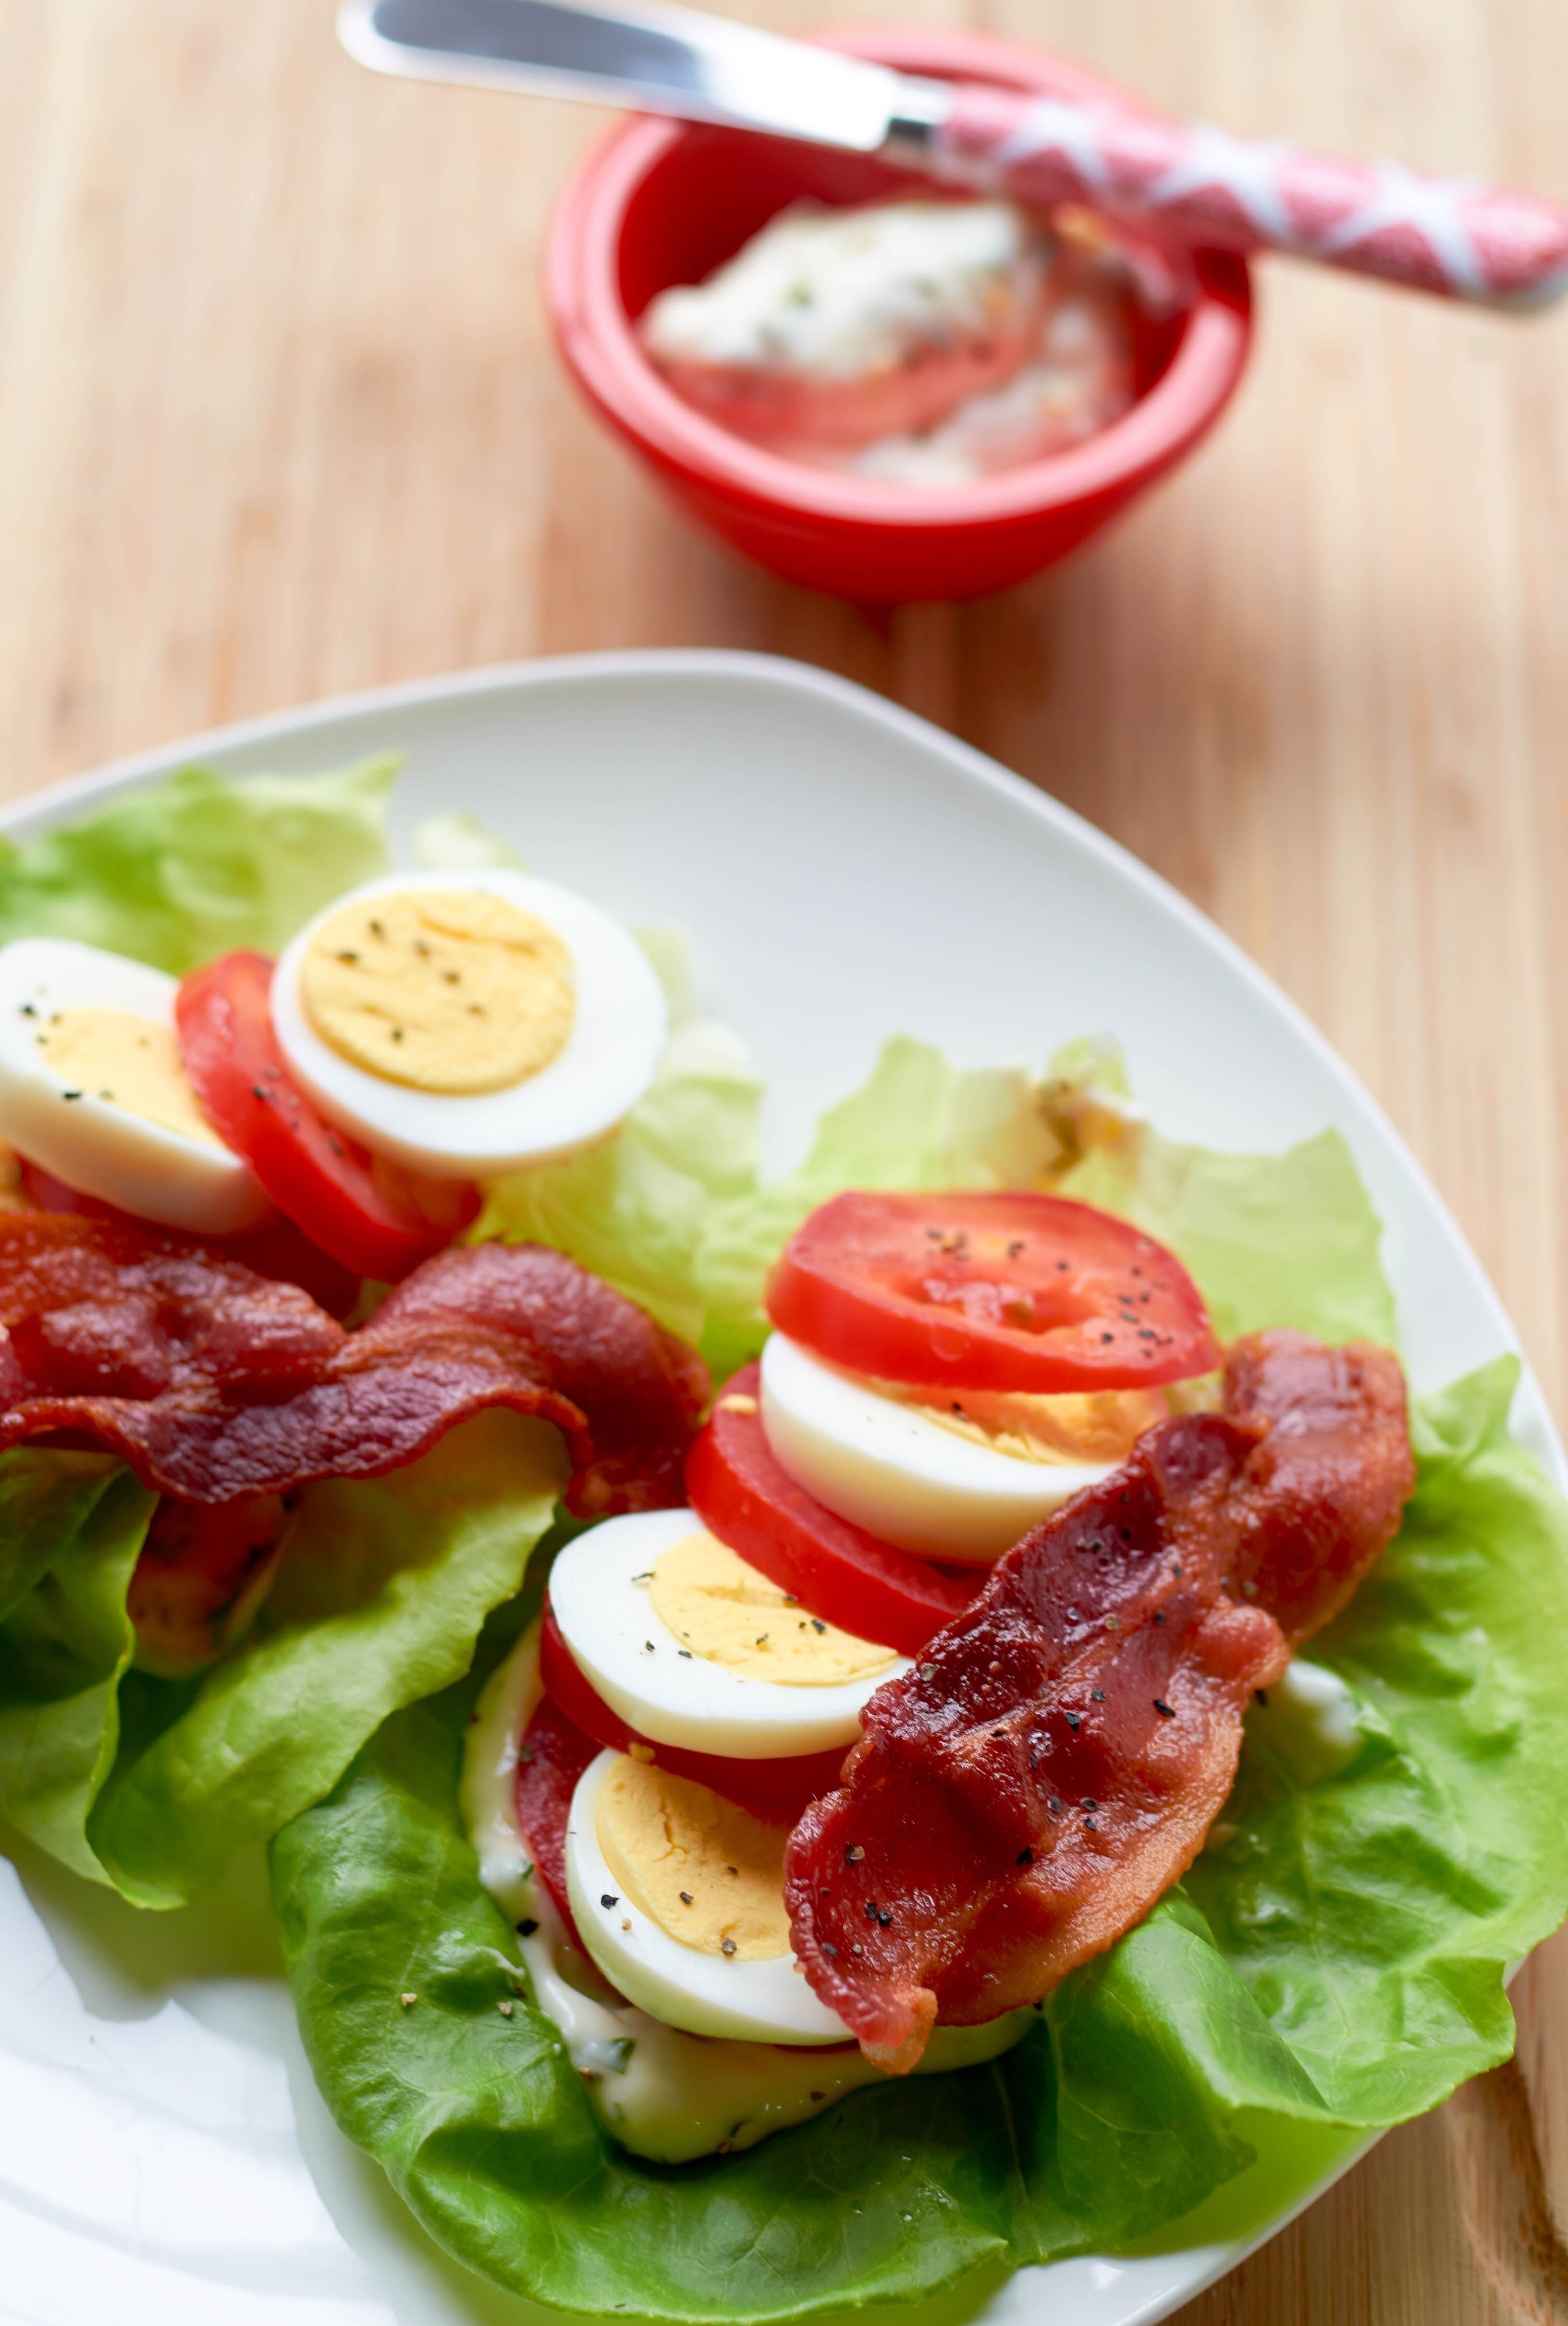 Enjoy the flavors of a BLT sans bun with our lettuce wrap version which encases savory bacon in a refreshing blanket of lettuce